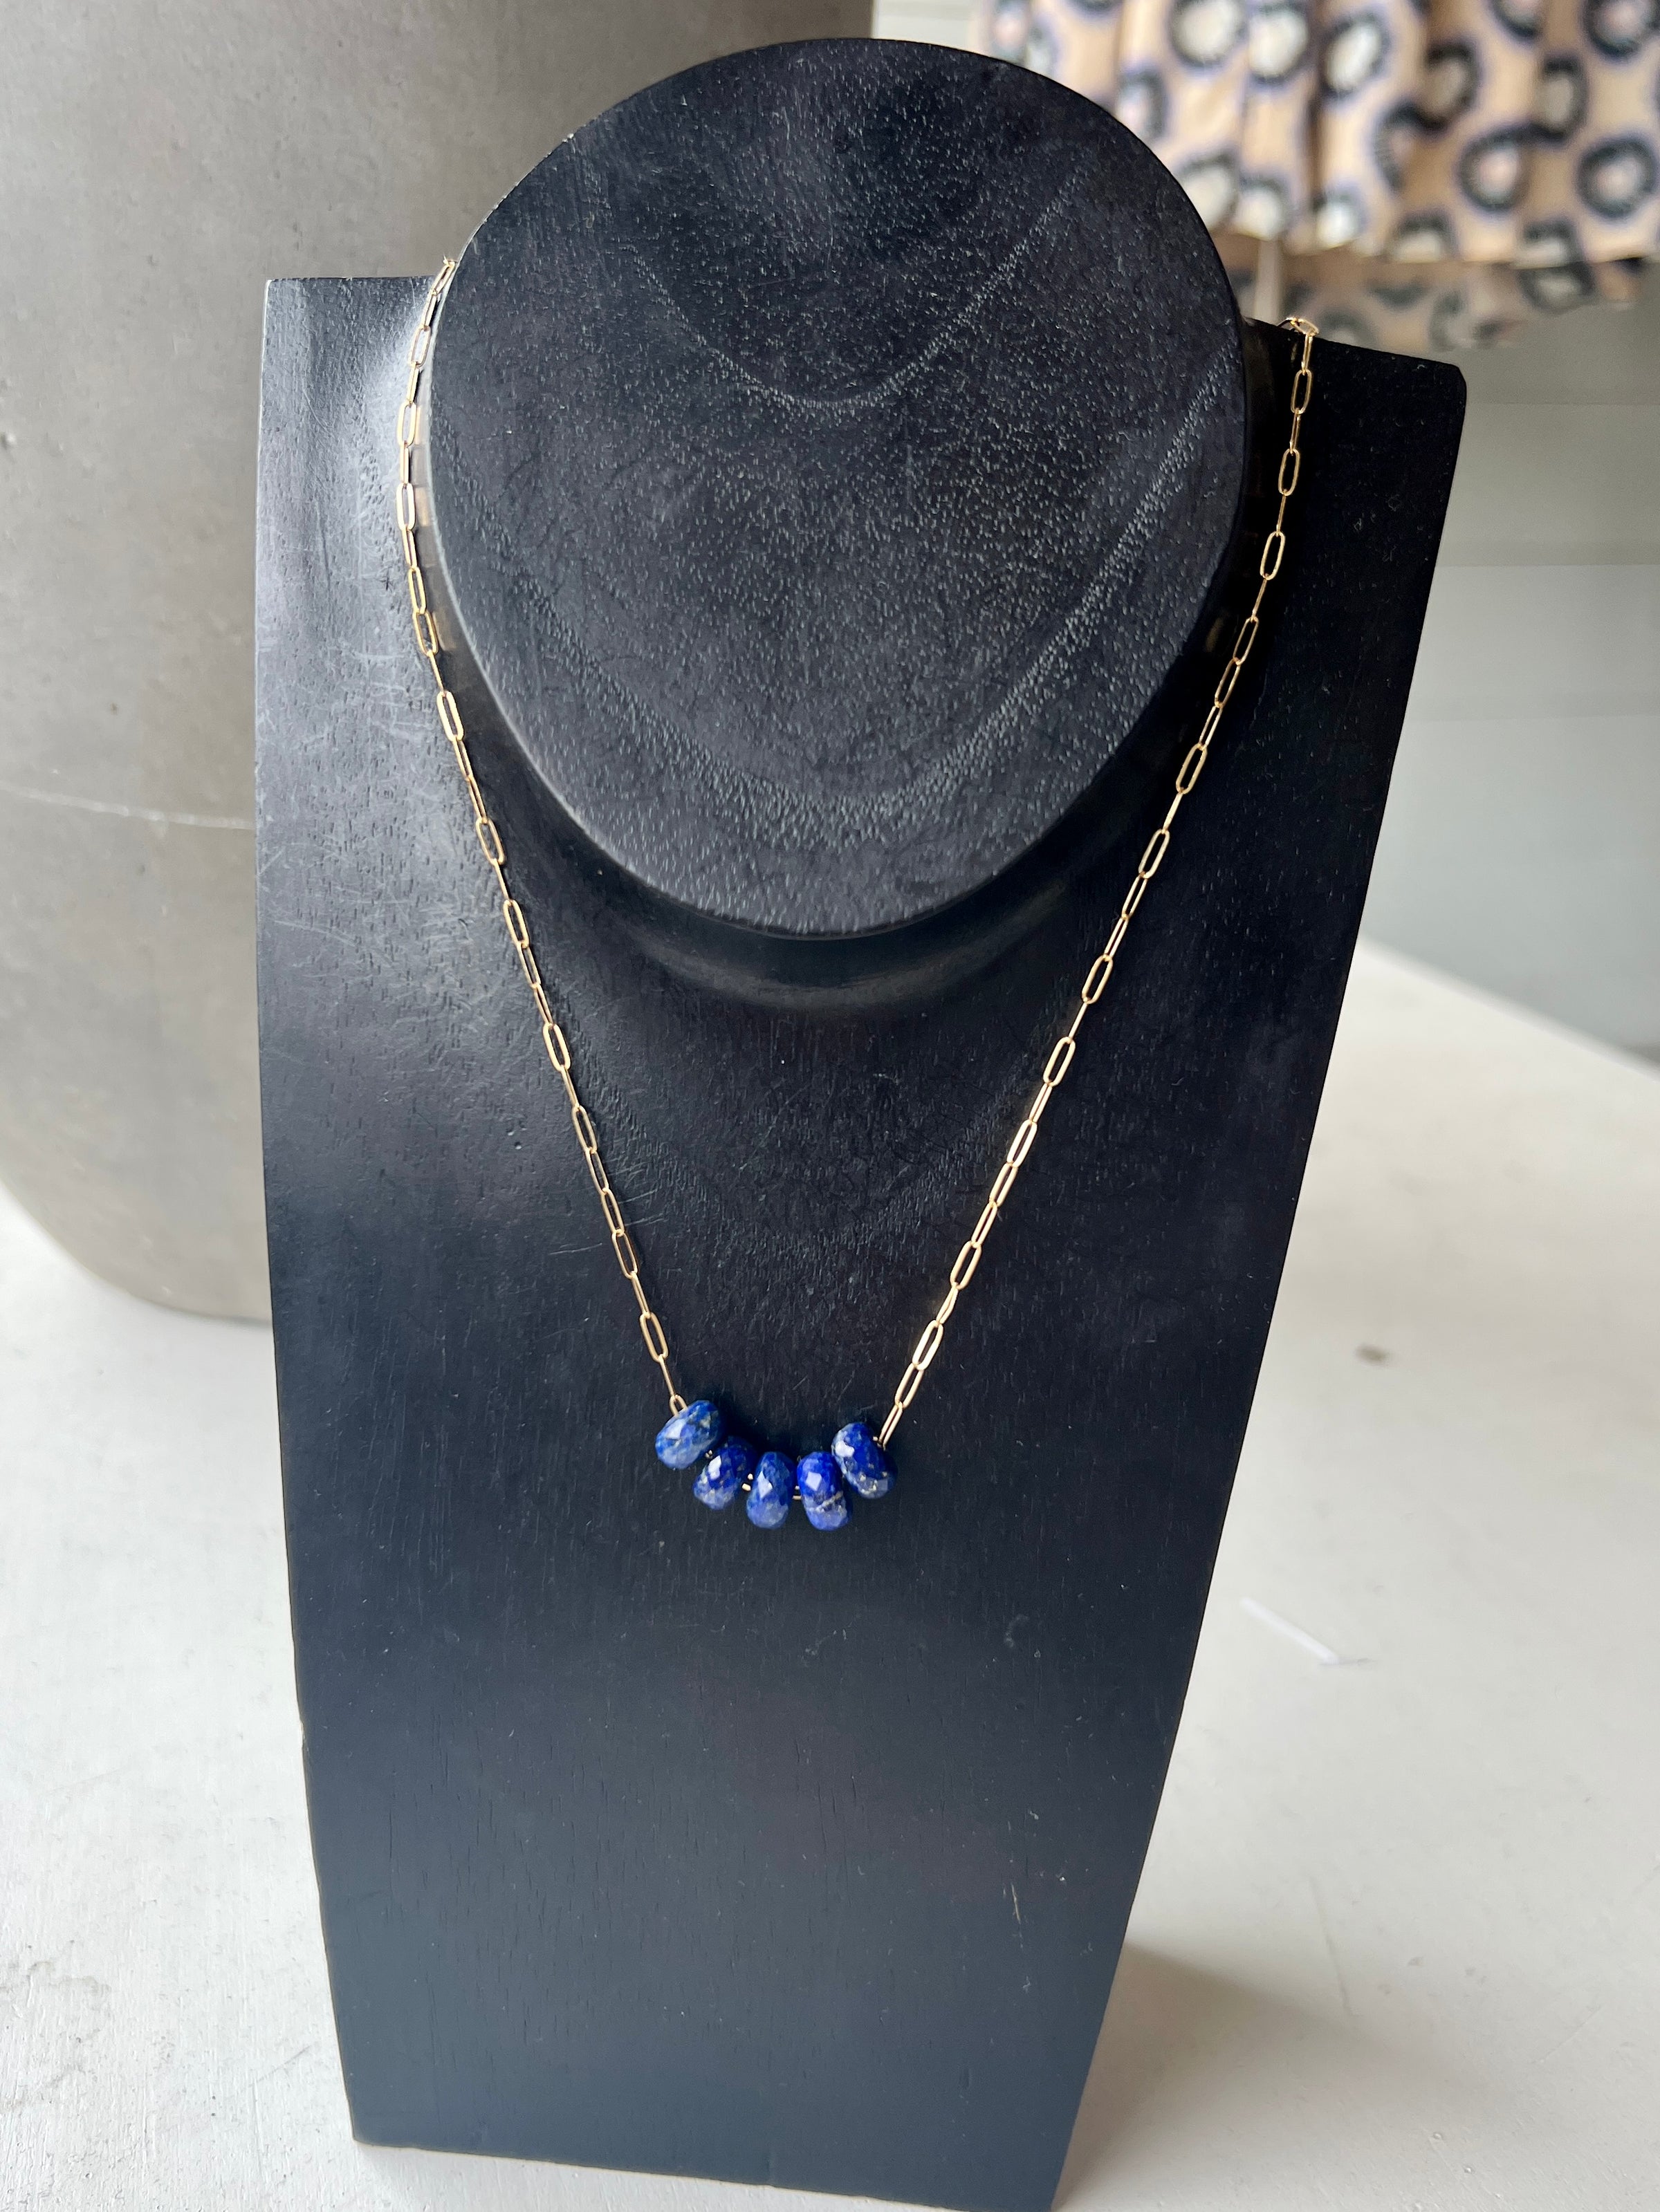 Bent by Courtney - Lapis Beaded Necklace - Council Studio